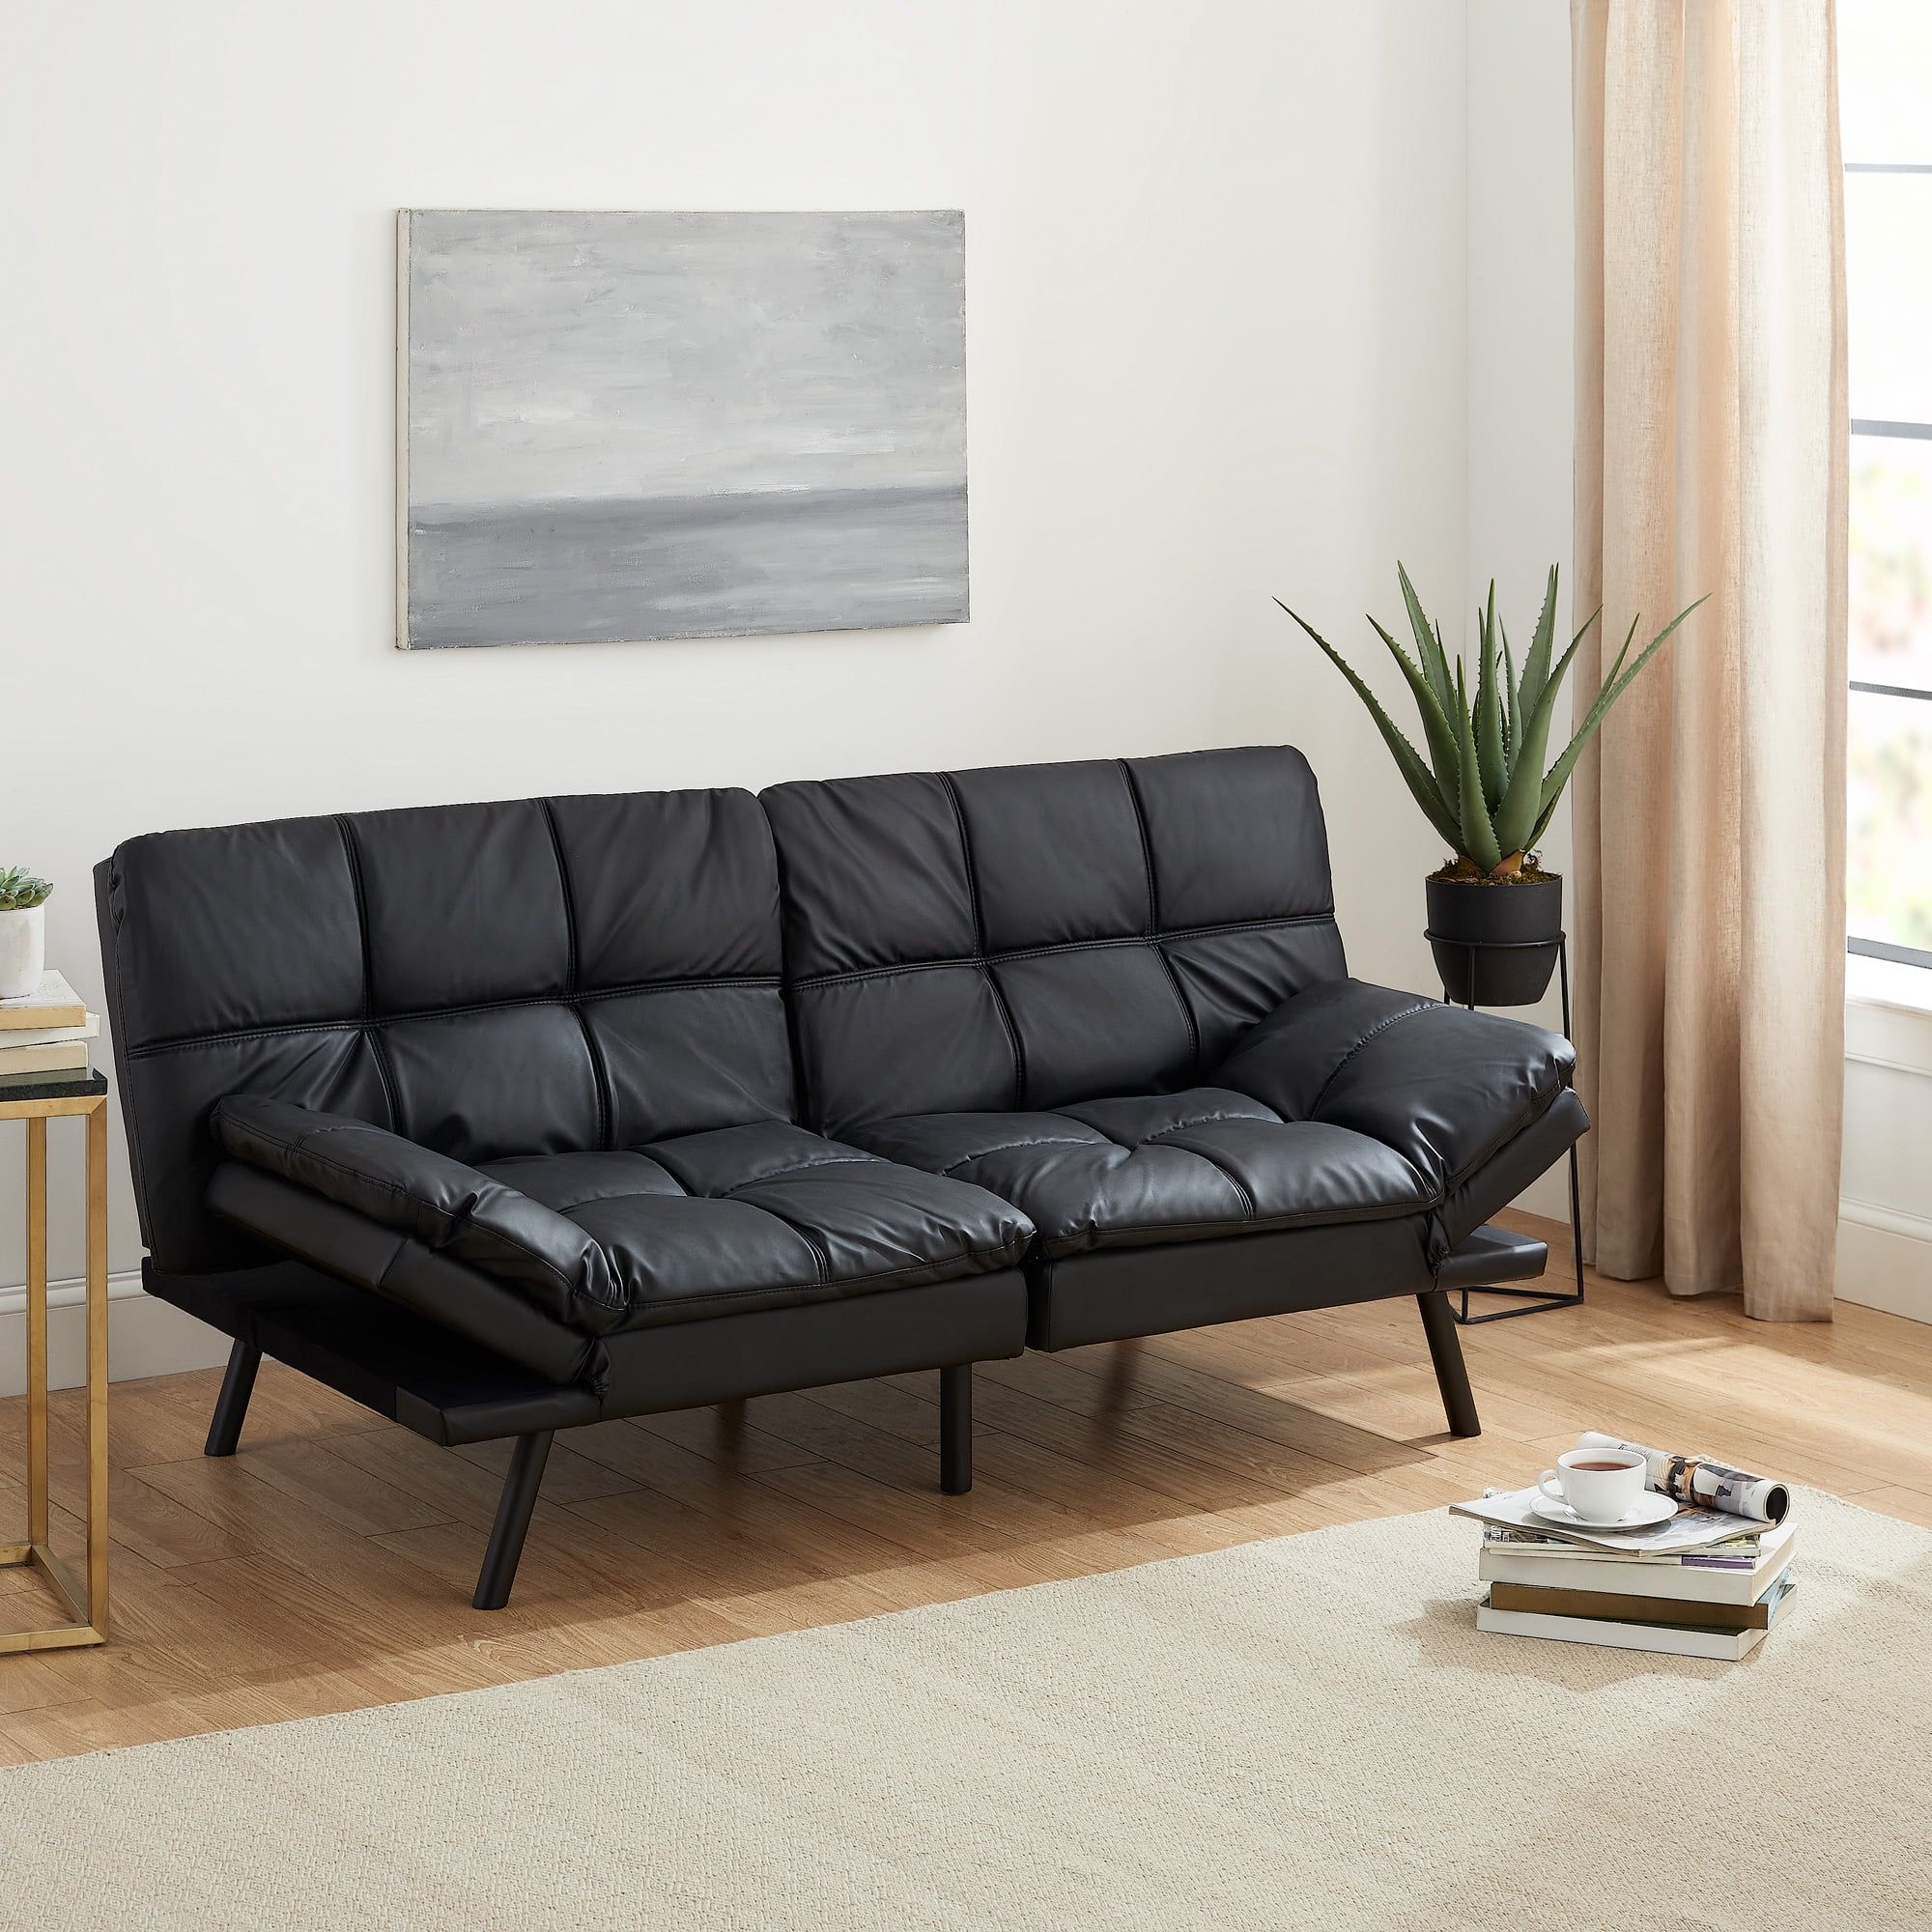 Mainstays Memory Foam Futon, Black Faux Leather – Walmart Intended For Black Faux Suede Memory Foam Sofas (Gallery 6 of 20)